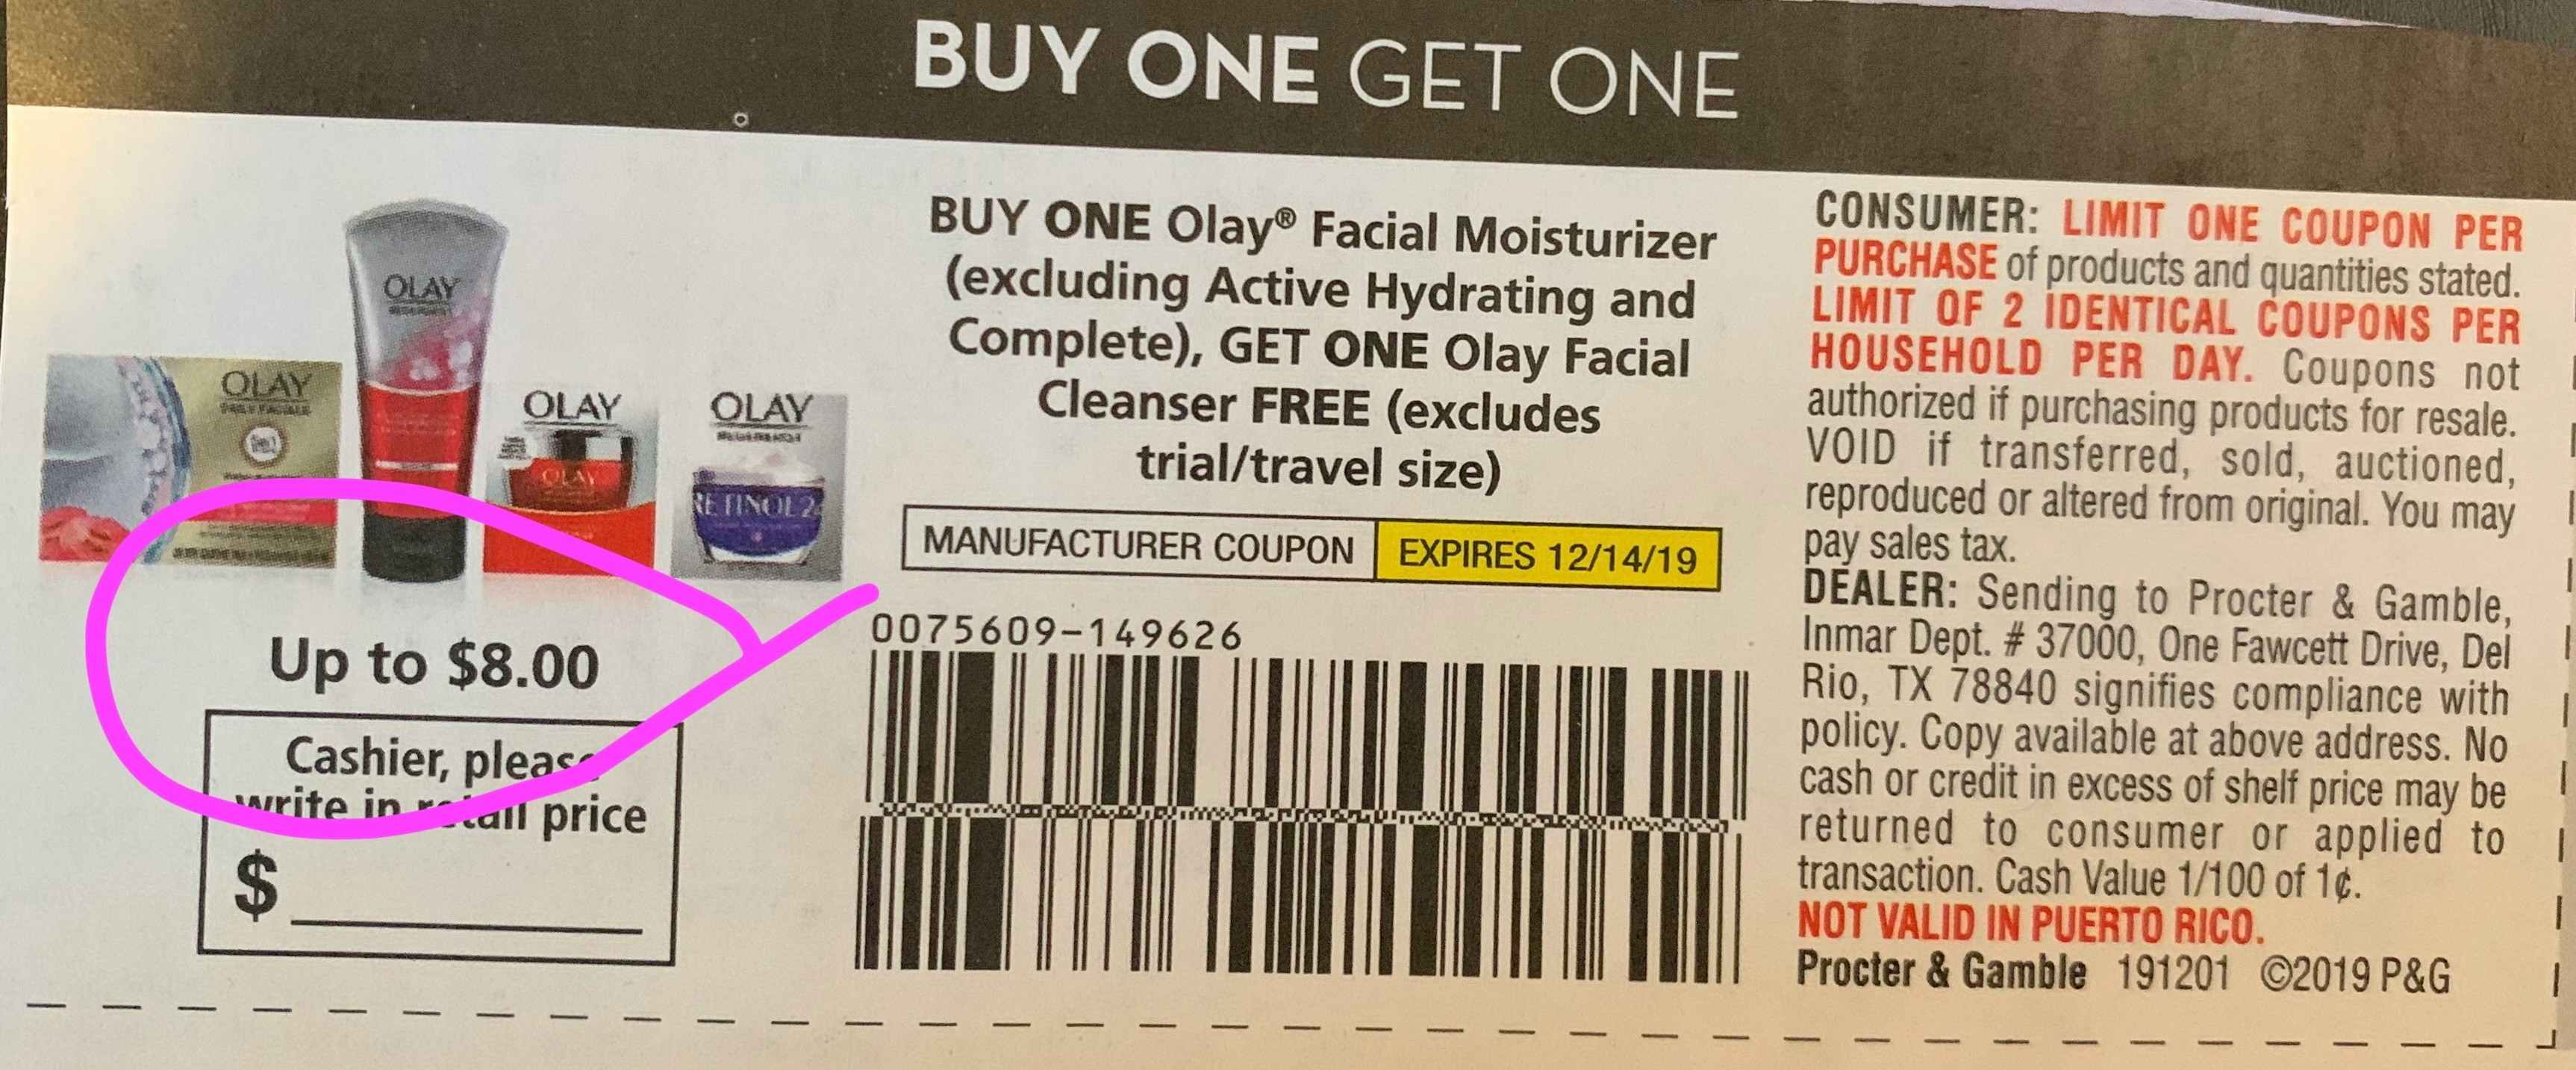 A manufacturer coupon from Olay for a buy one get one deal for up to $8.00